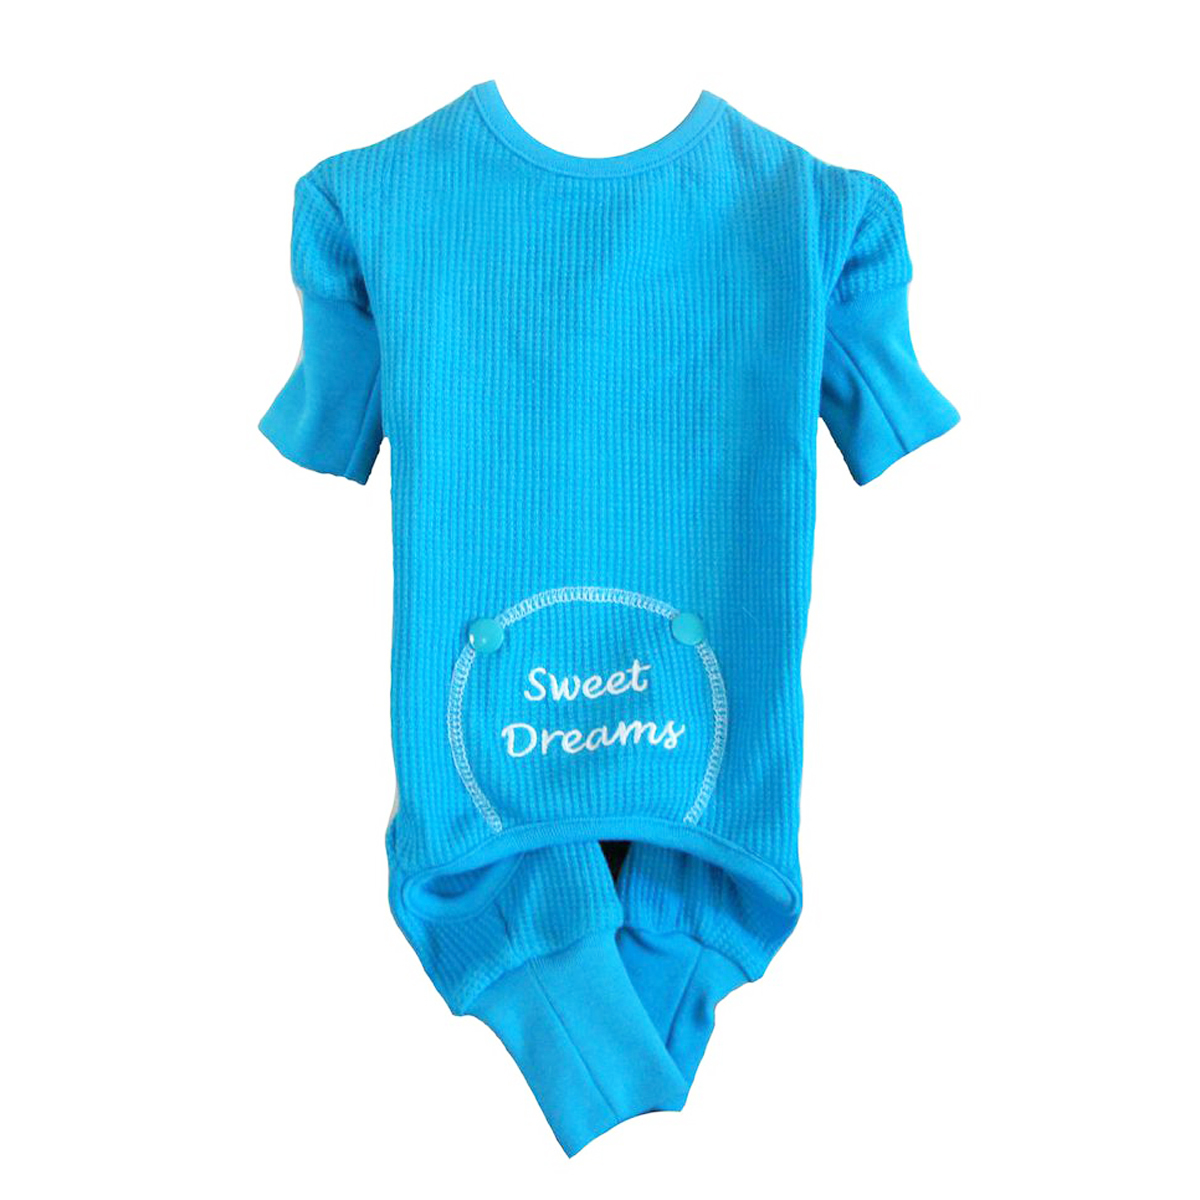 Sweet Dreams Embroidered Dog Pajamas by Doggie Design - Blue